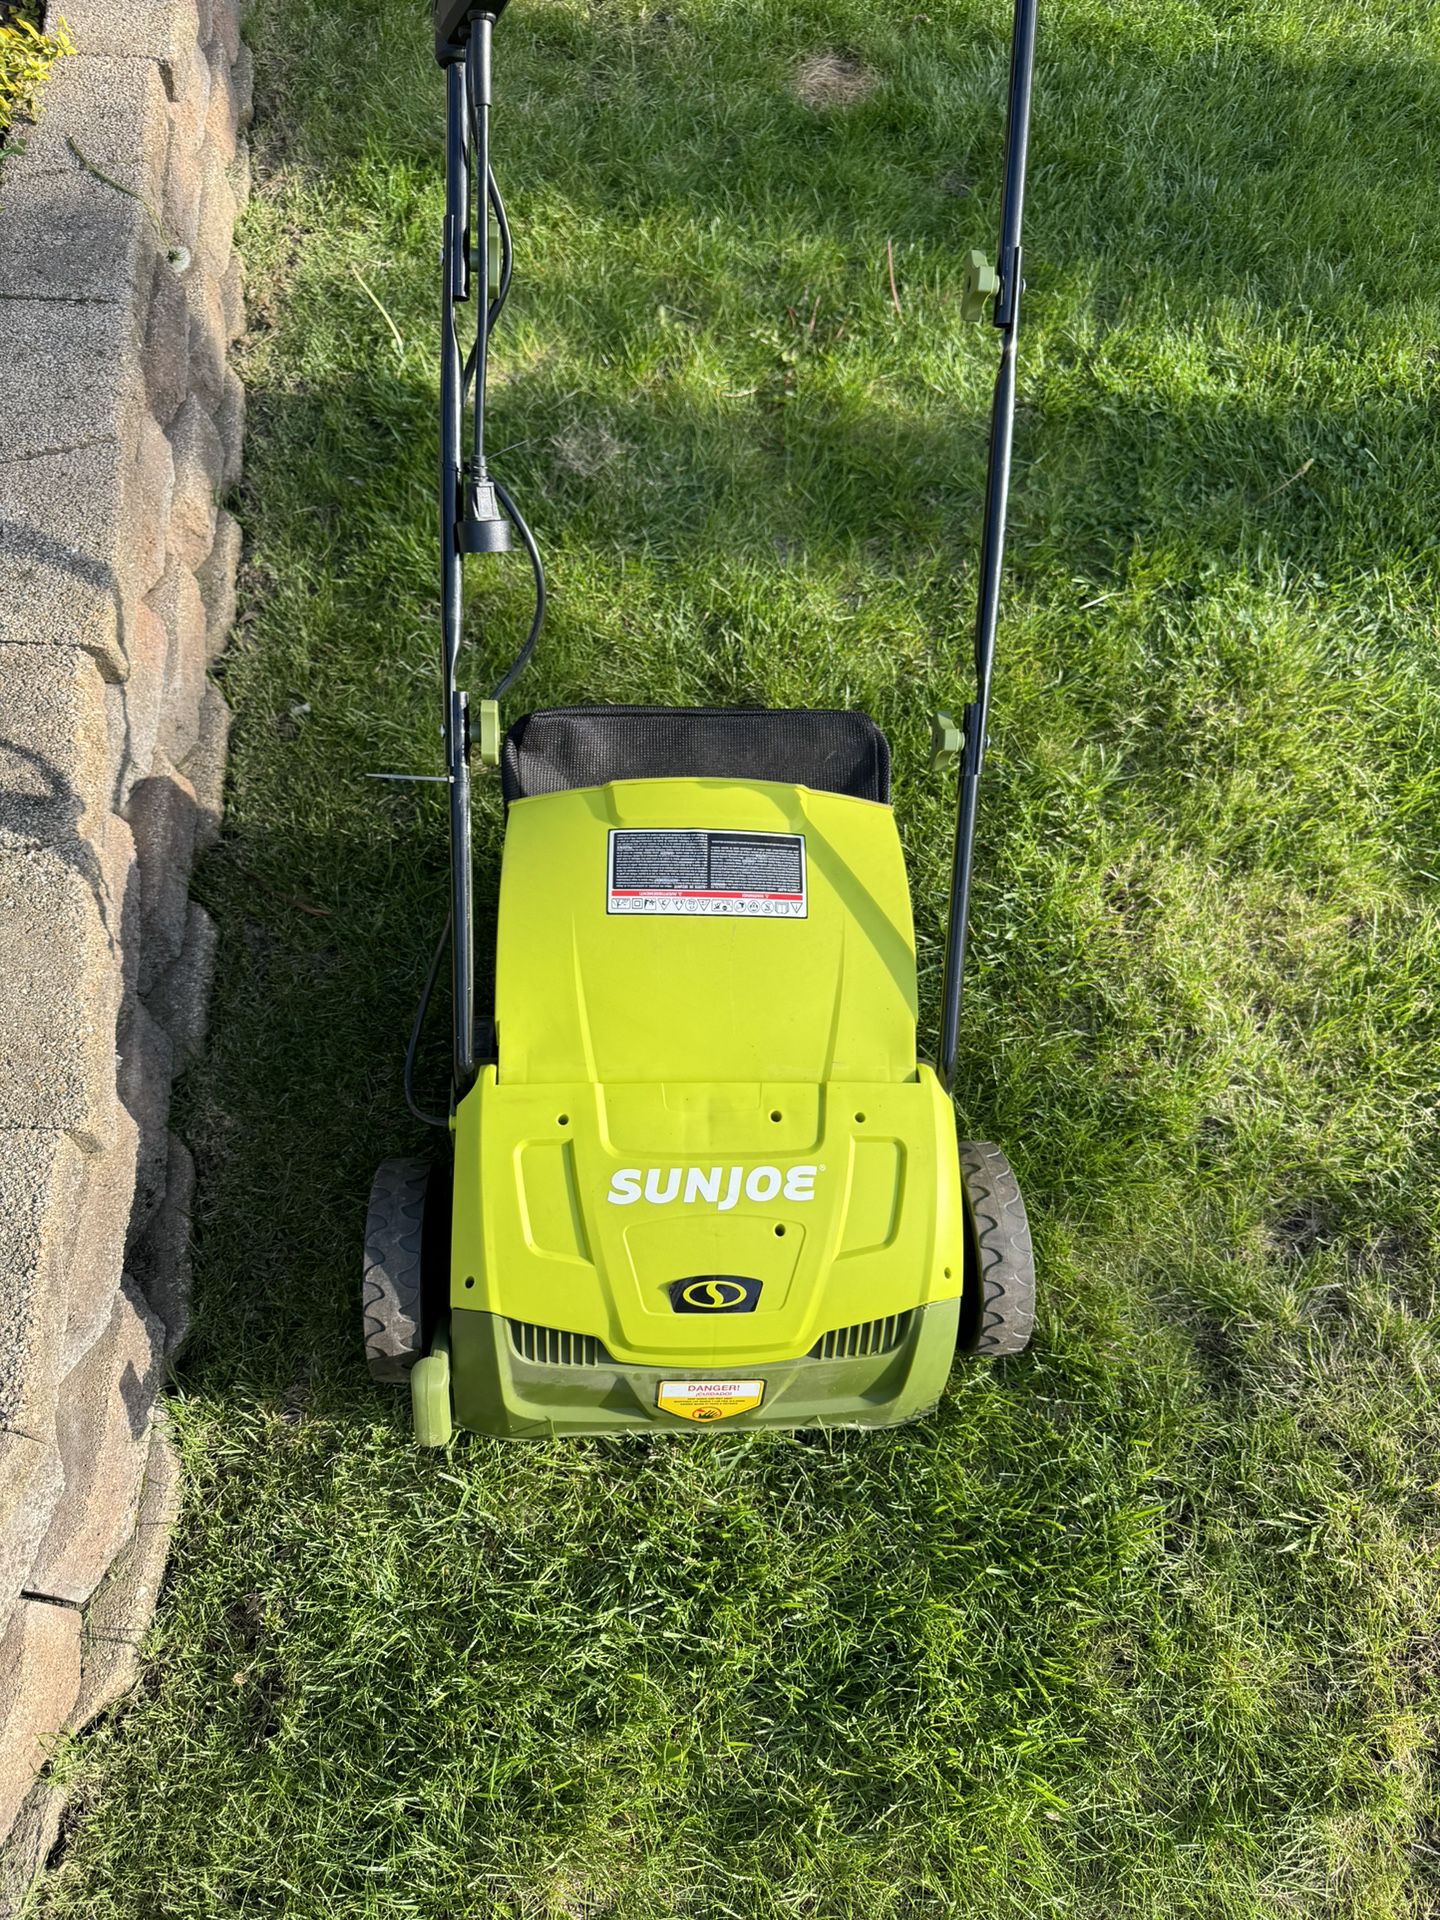 Preowned Working Sun Joe Electric Lawn Dethatcher W/ Collection Bag